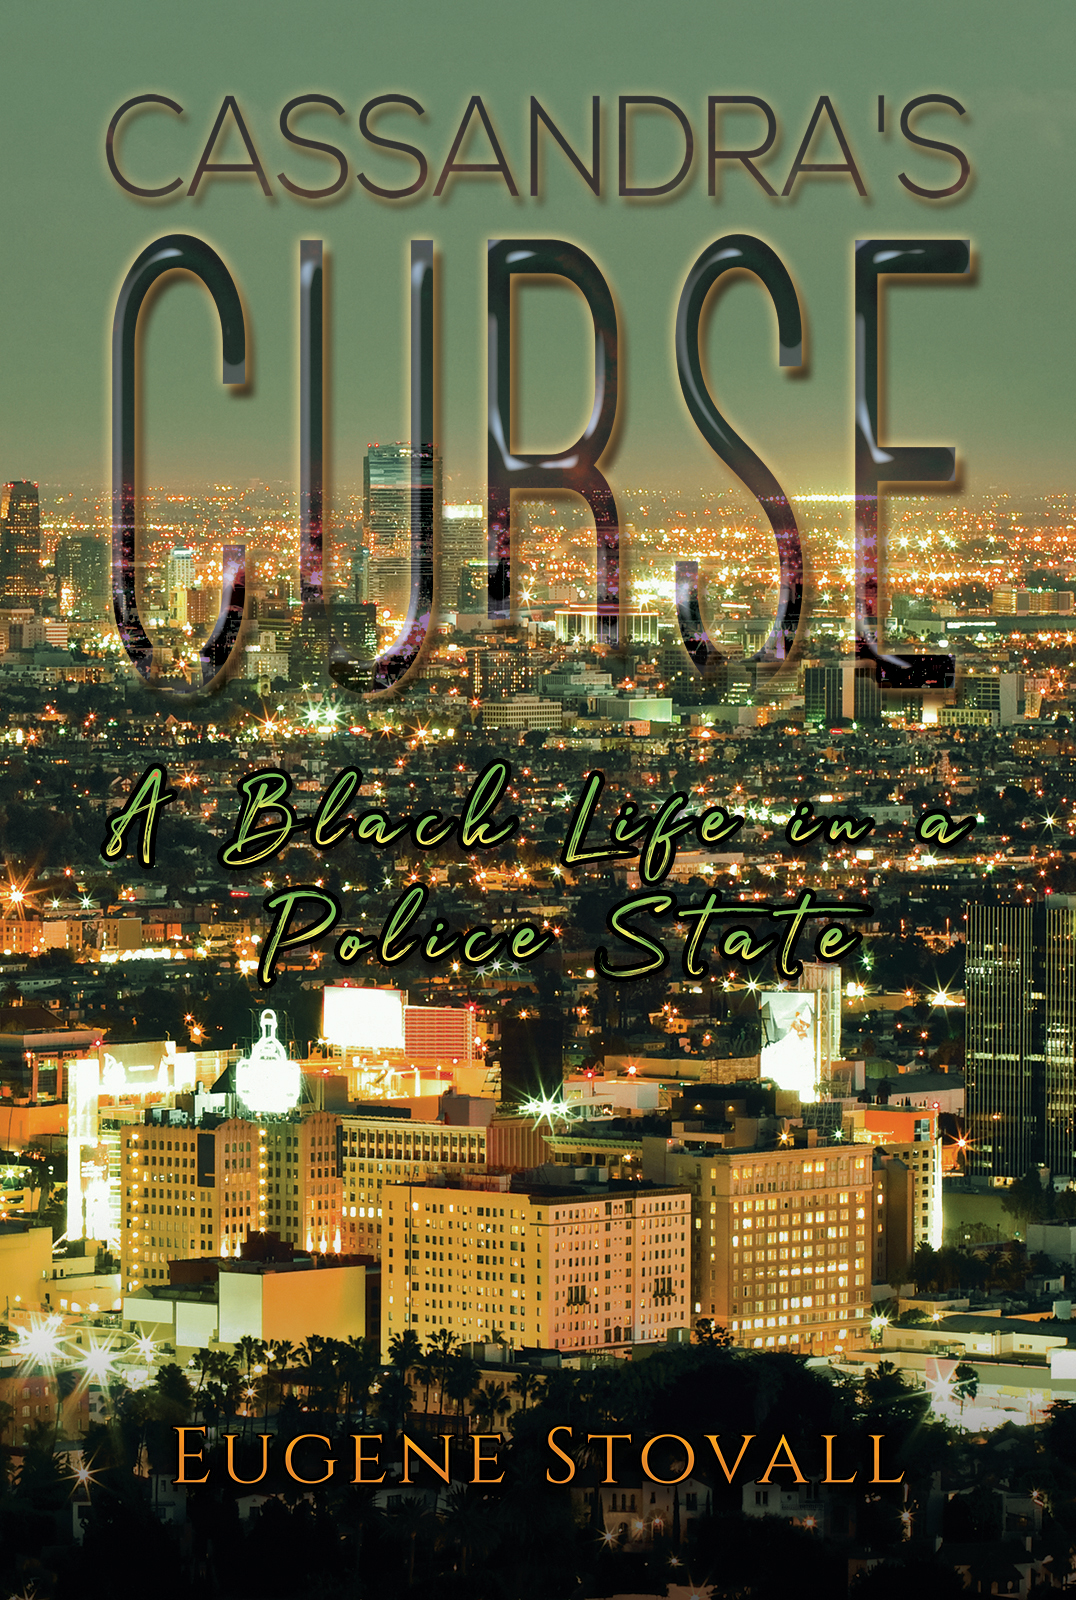 This image is the cover for the book Cassandra's Curse